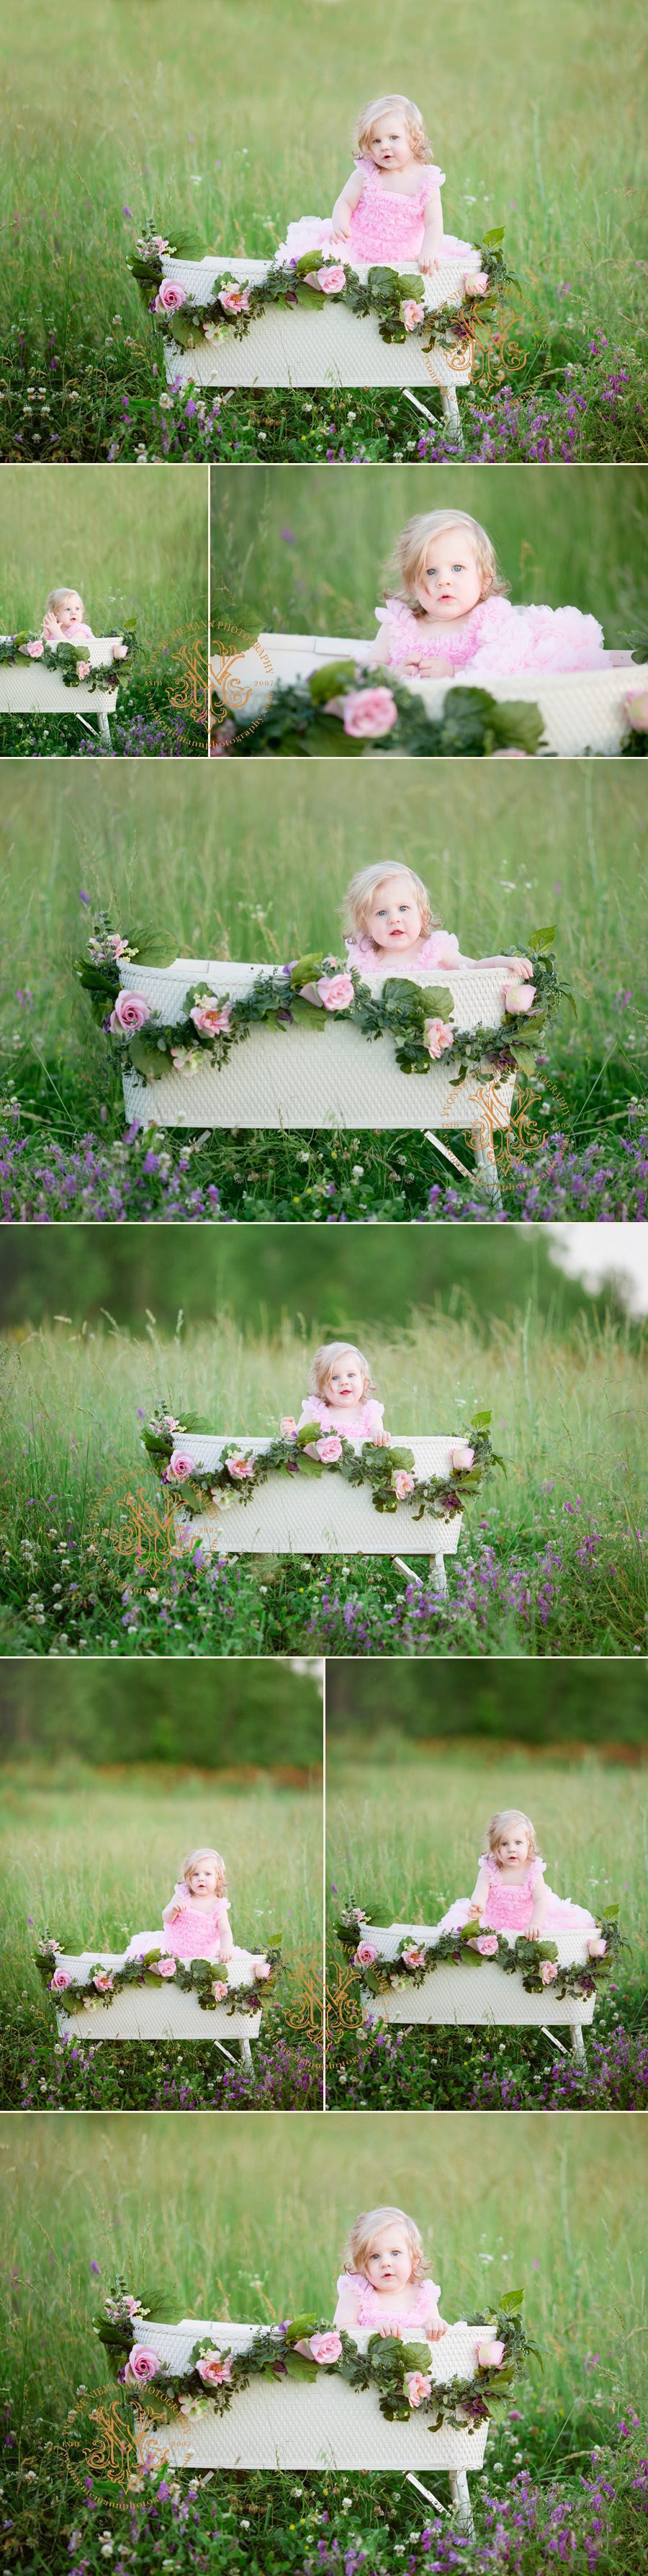 Adorable baby girl in a field of purple flowers in a vintage white bassinet taken by Yvonne Niemann Photography in St. Louis.